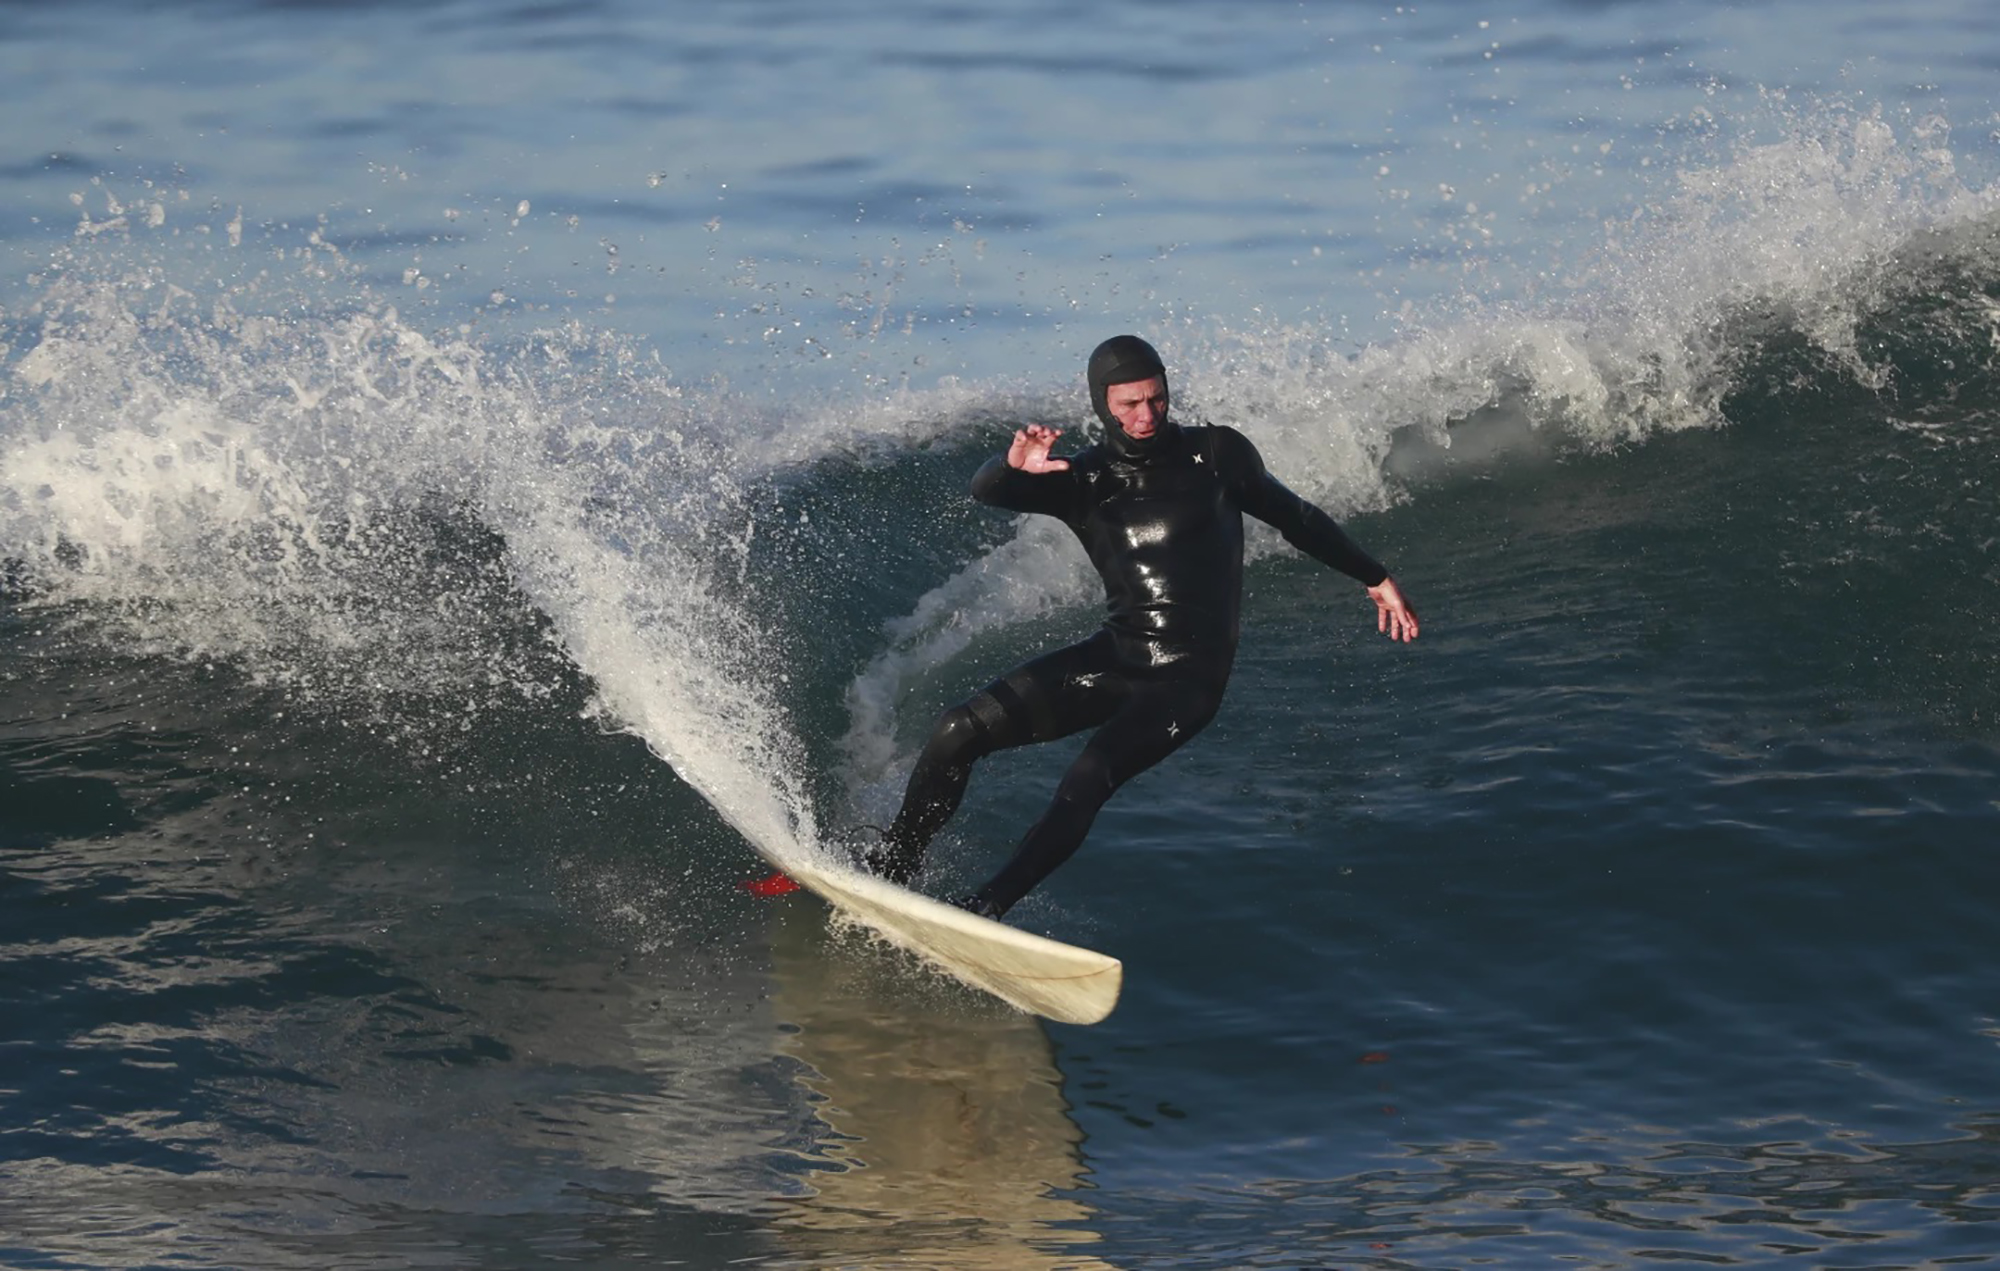 Derek Dunfee grew up surfing in San Diego and and still surfs small waves almost every day. (K.C. Alfred/San Diego Union-Tribune/TNS)